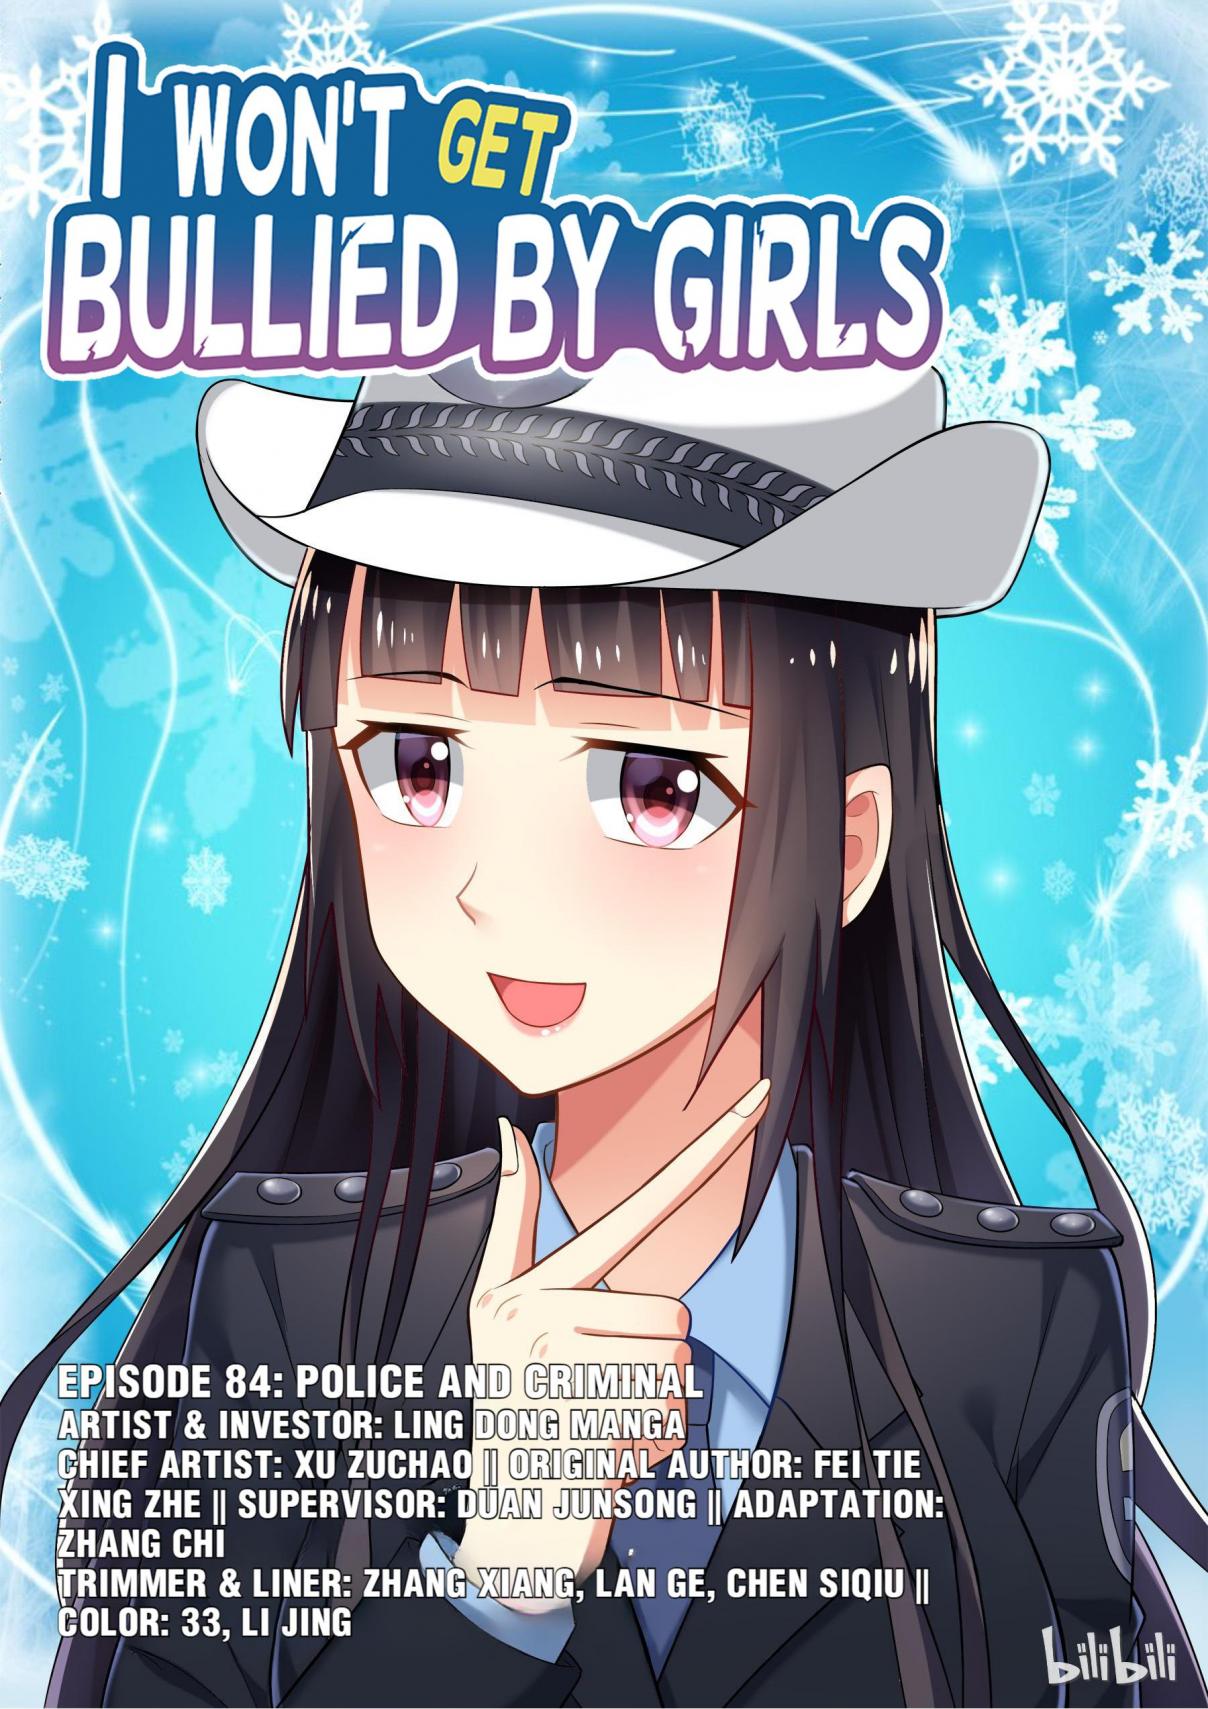 I Don't Want to Be Bullied by Girls 84